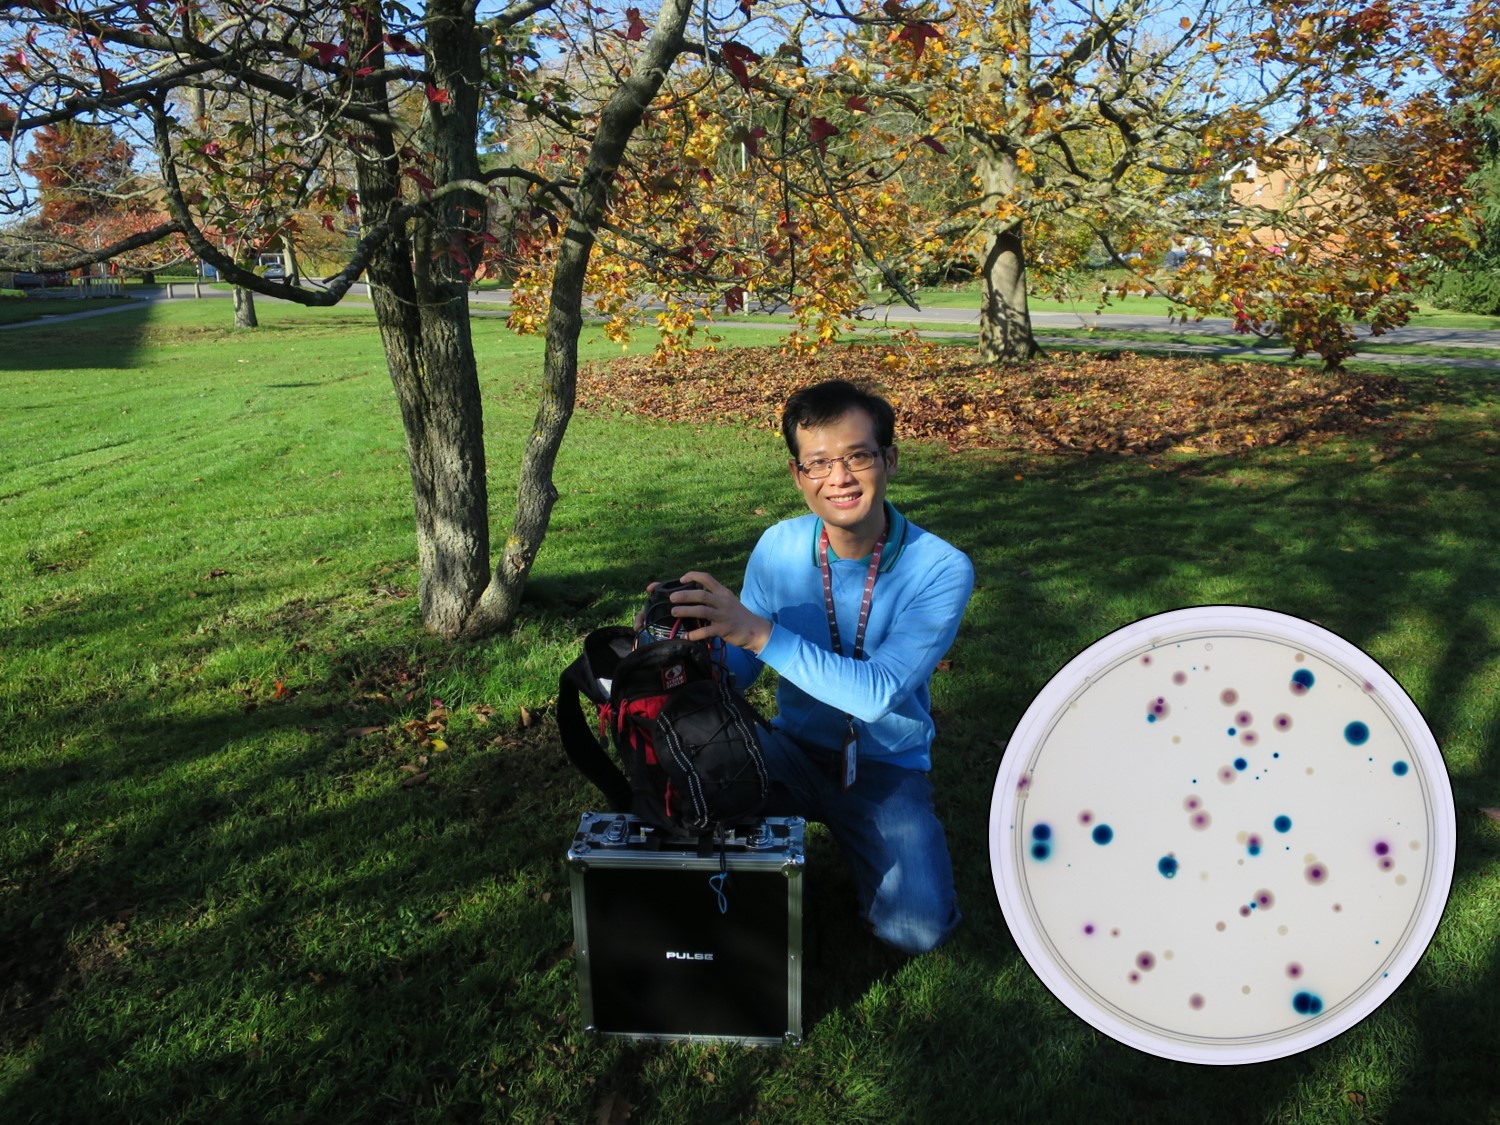 New Paper Out! MicroMI: a Portable Microbiological Mobile Incubator